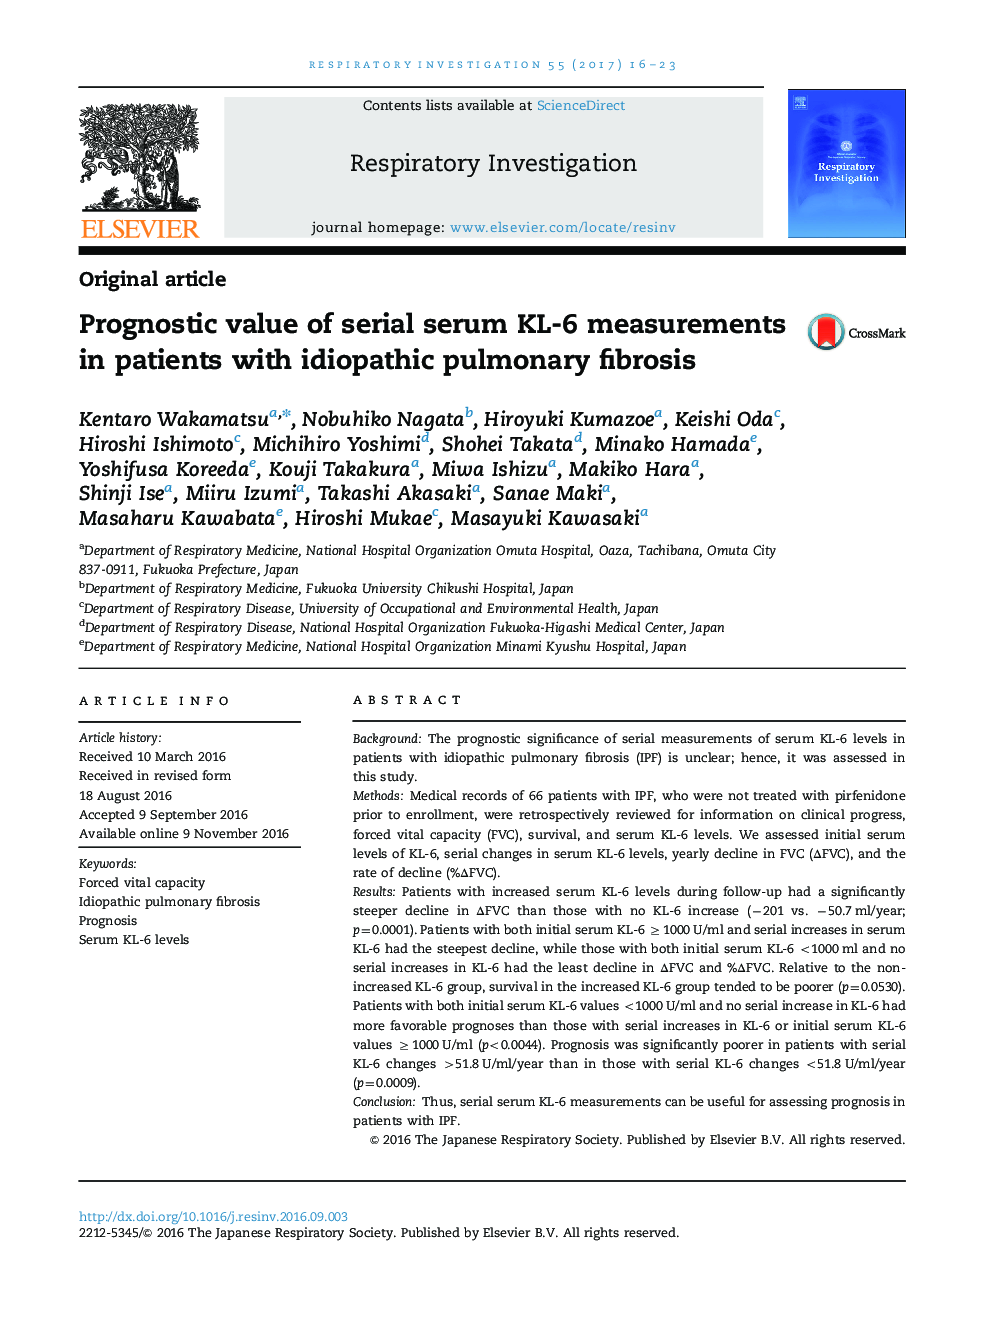 Prognostic value of serial serum KL-6 measurements in patients with idiopathic pulmonary fibrosis